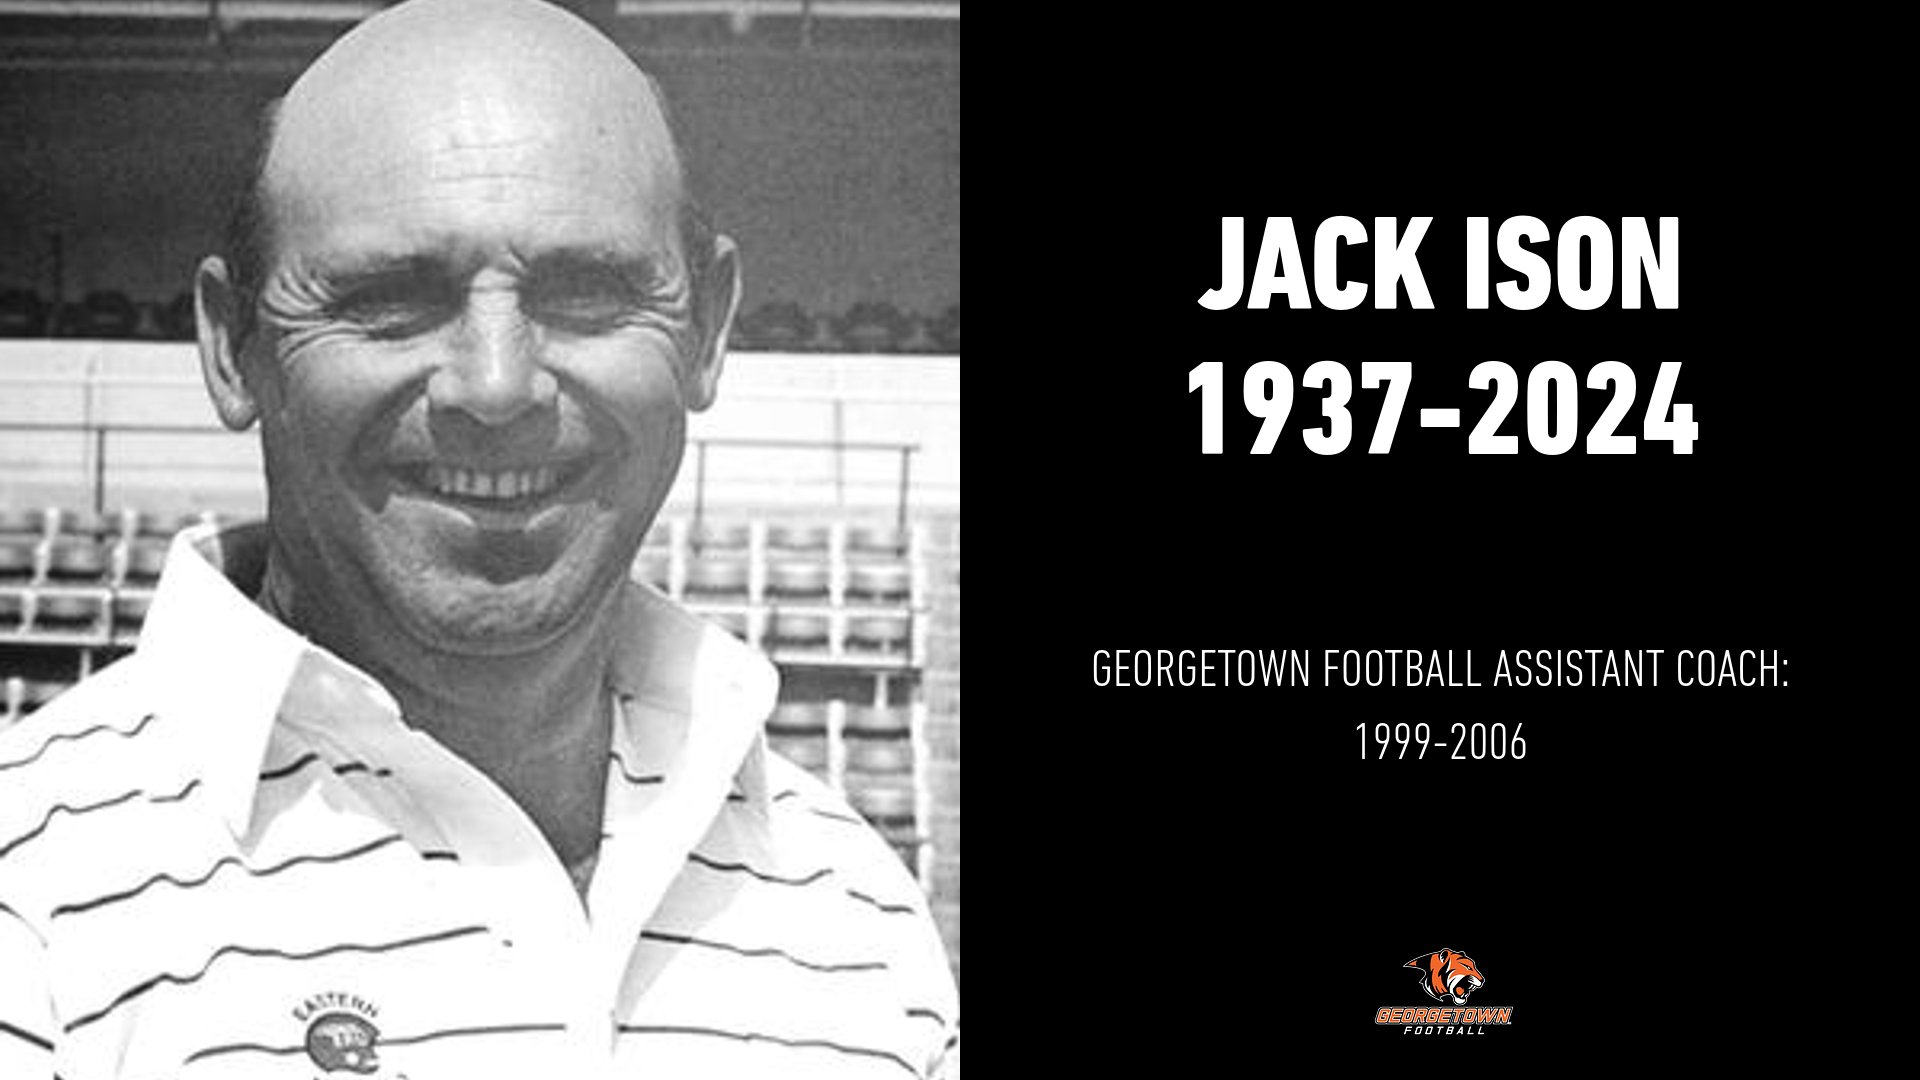 Georgetown Football remembers Coach Jack Ison